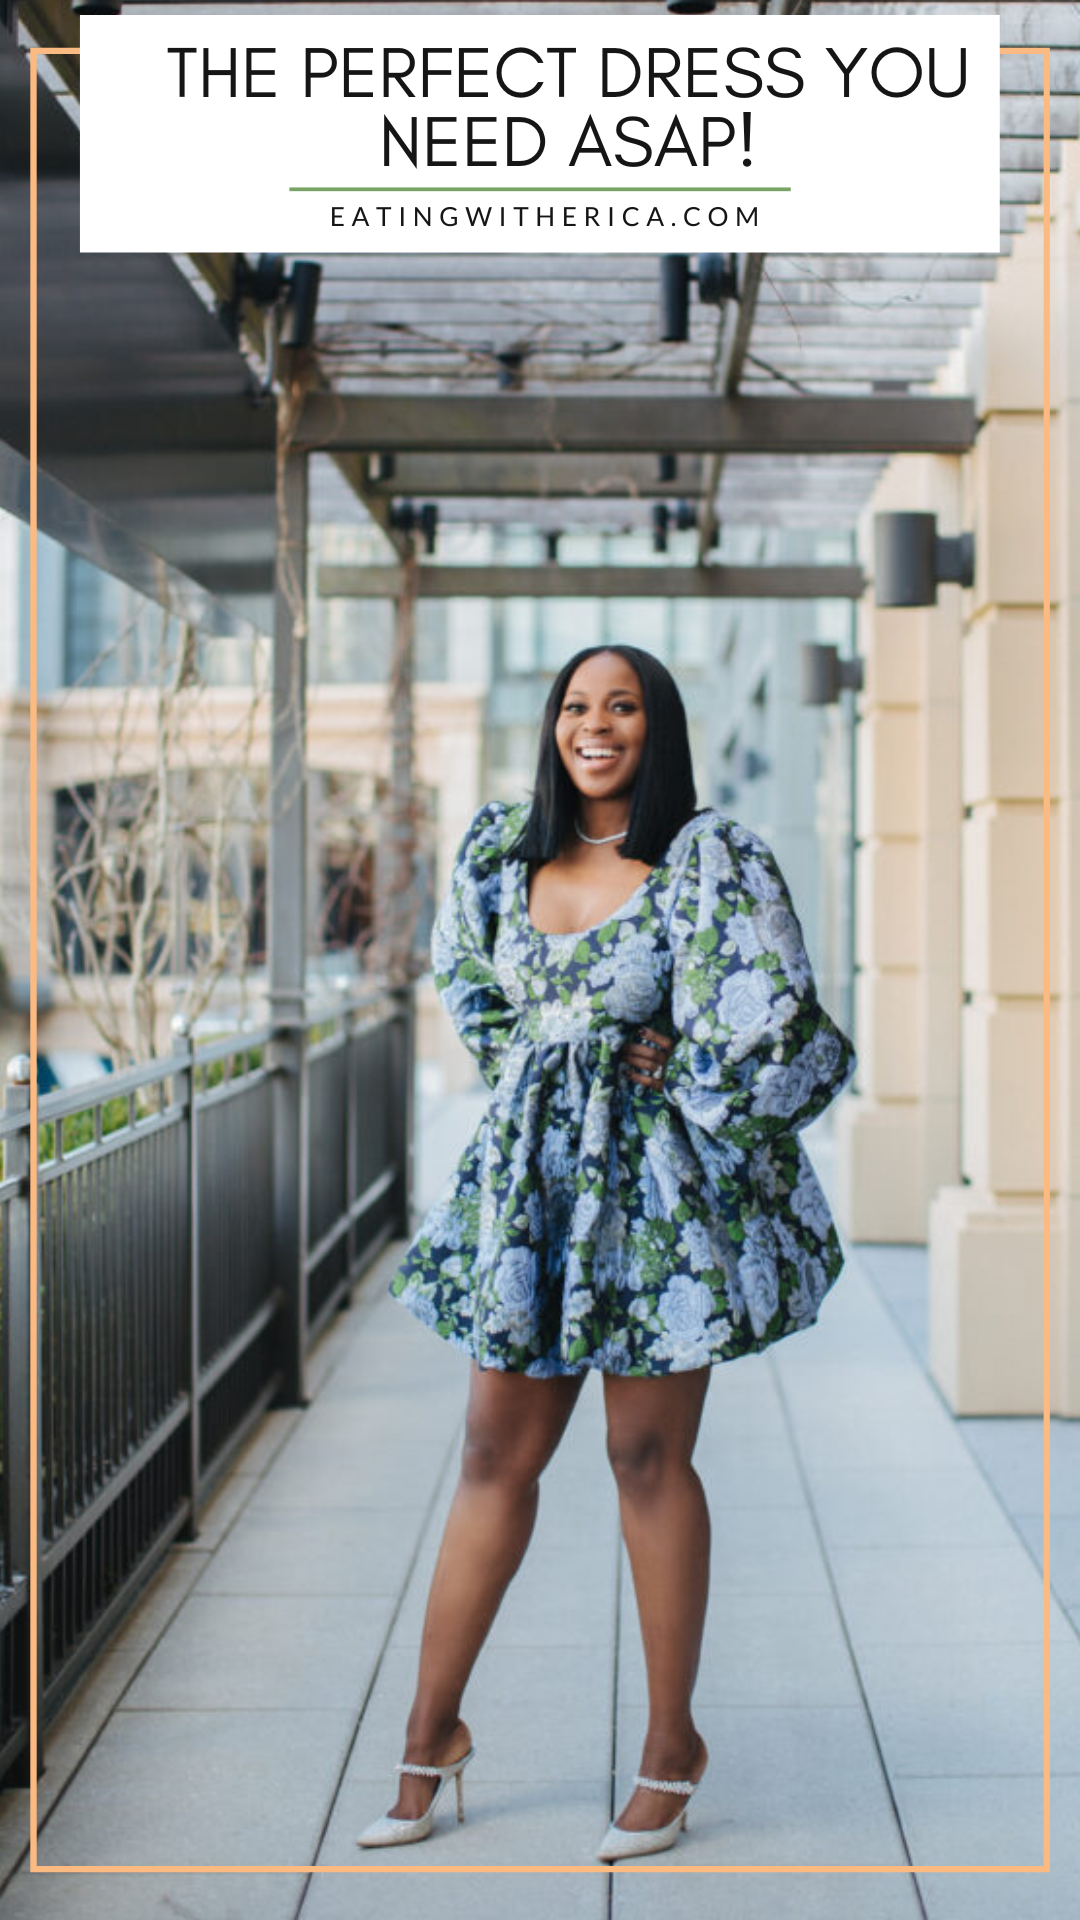 Hands down the perfect dress you need ASAP! Curious why this ASOS Scoop Neck Dress with Ballon Sleeves is Eating with Erica's favorite? CLICK HERE to see why!